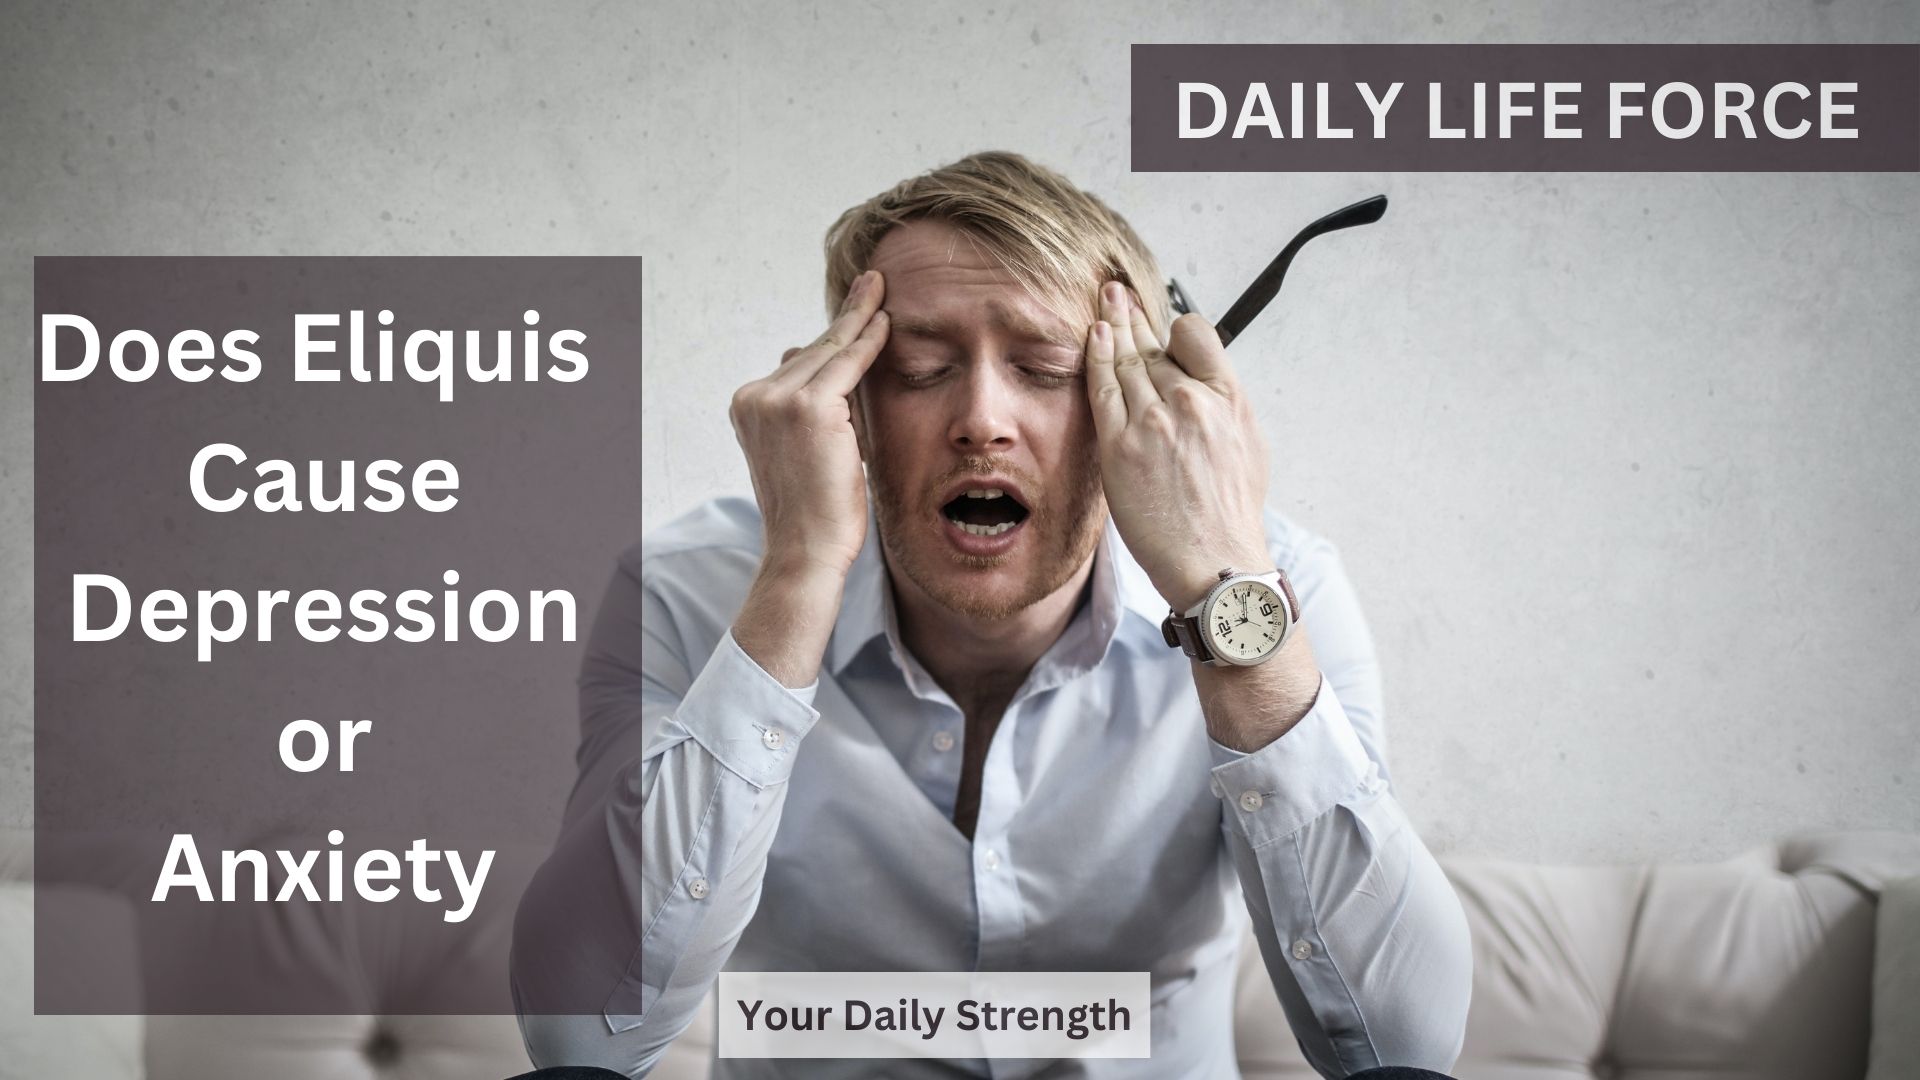 Eliquis Cause Depression or Anxiety